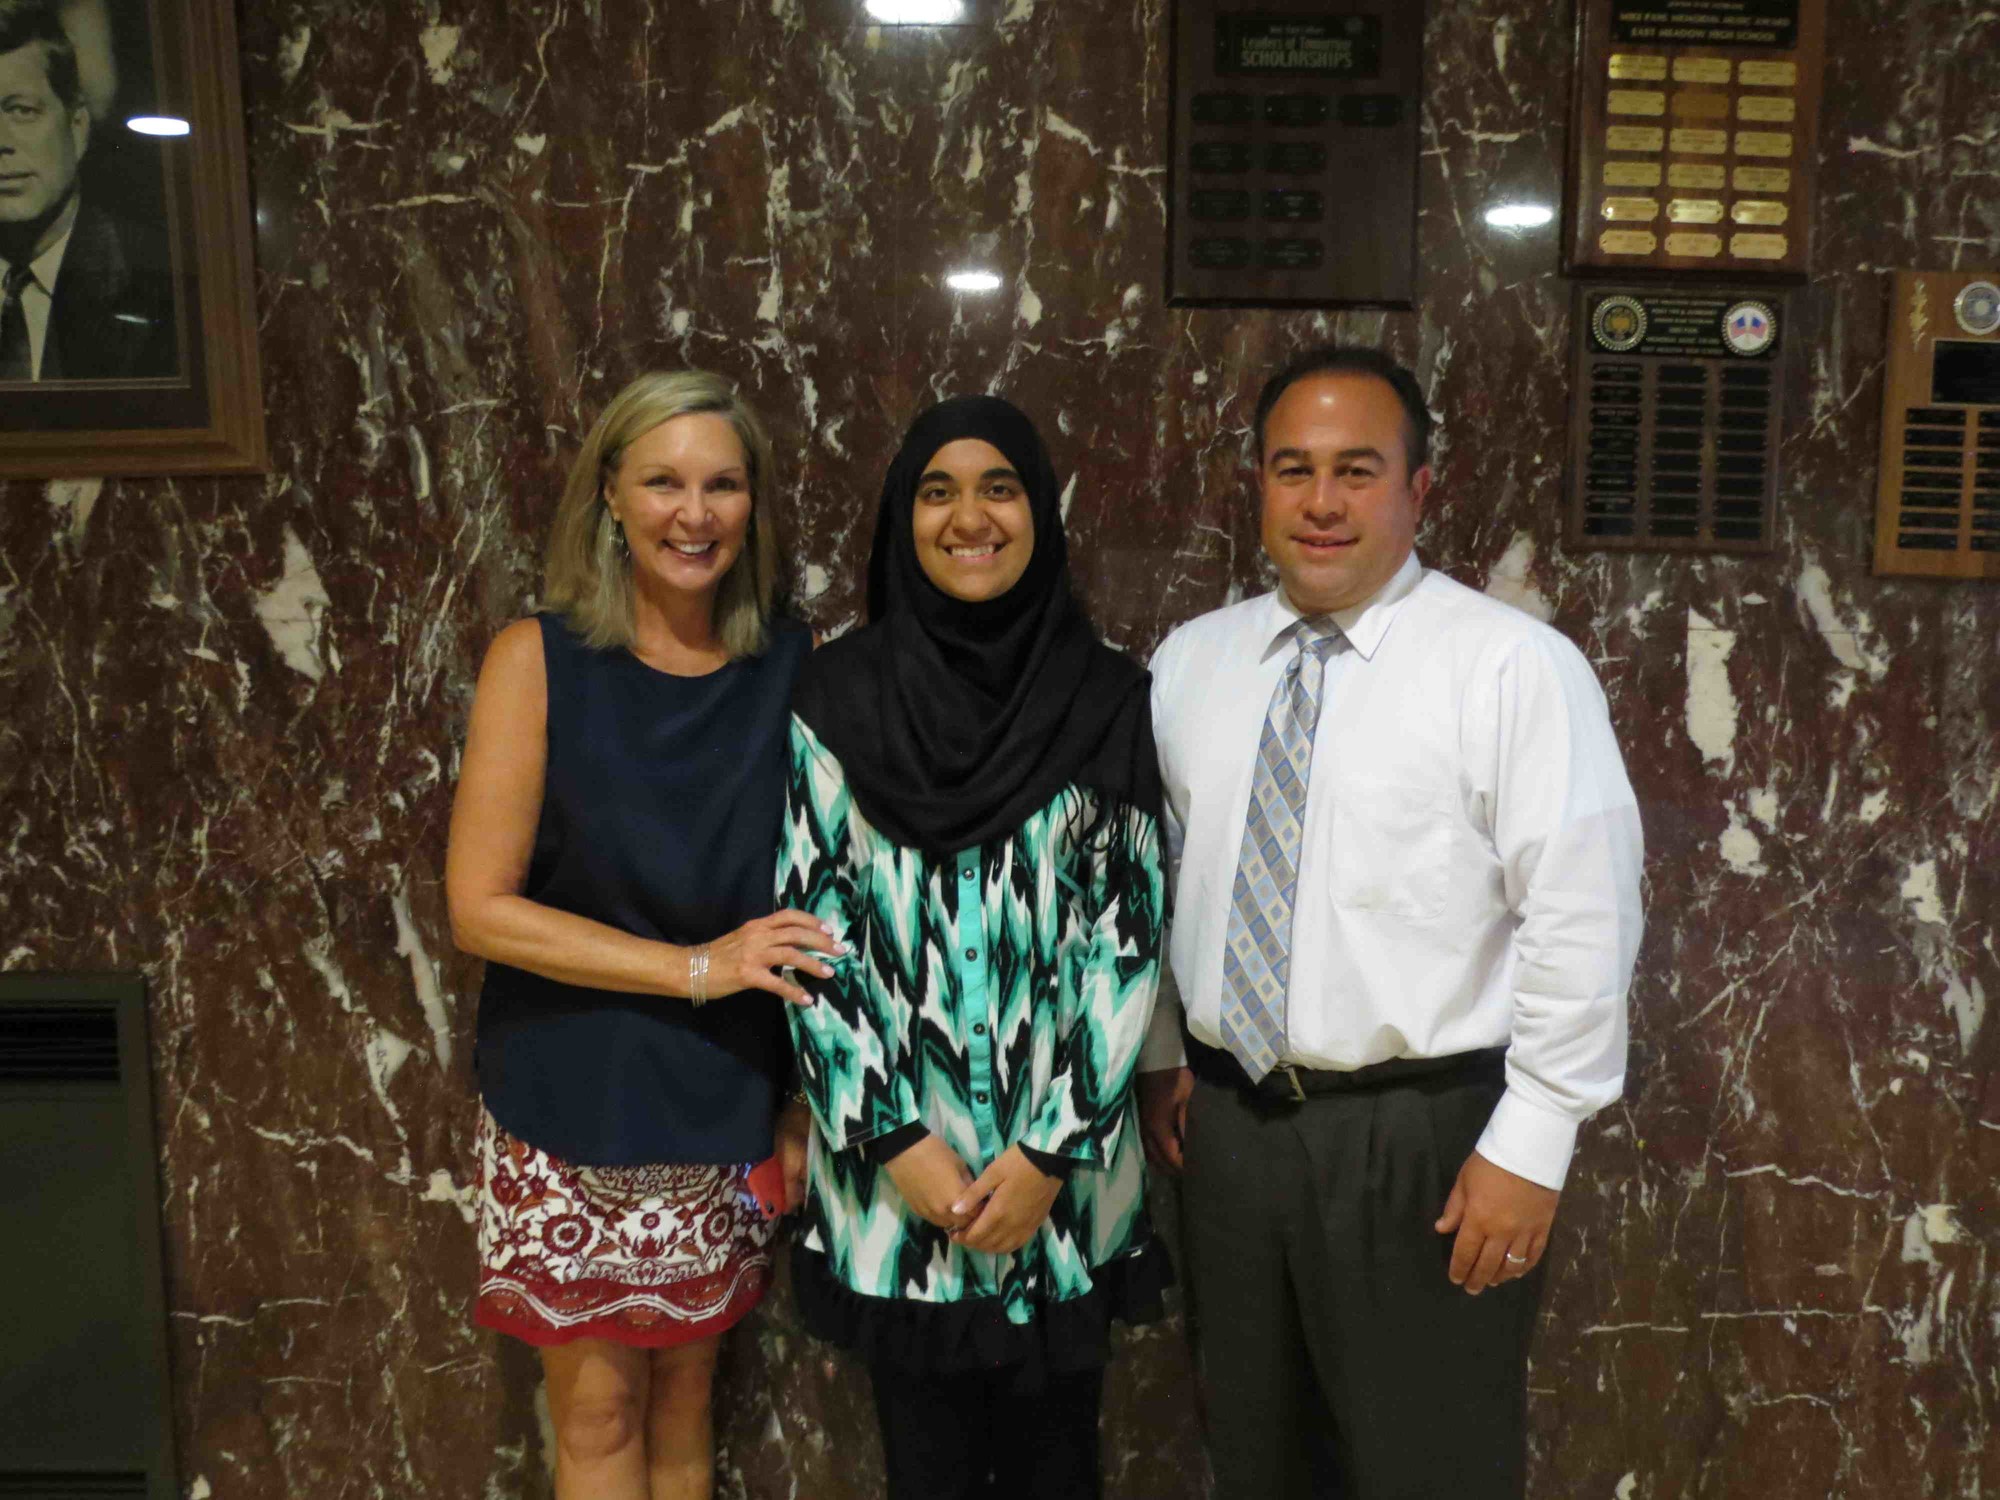 Zainab Nathani, of East Meadow High School, was recently named a semifinalist in the prestigious National Merit Scholarship Competition. She was congratulated by her guidance counselor, Joan Tomlin, and Principal Richard Howard.